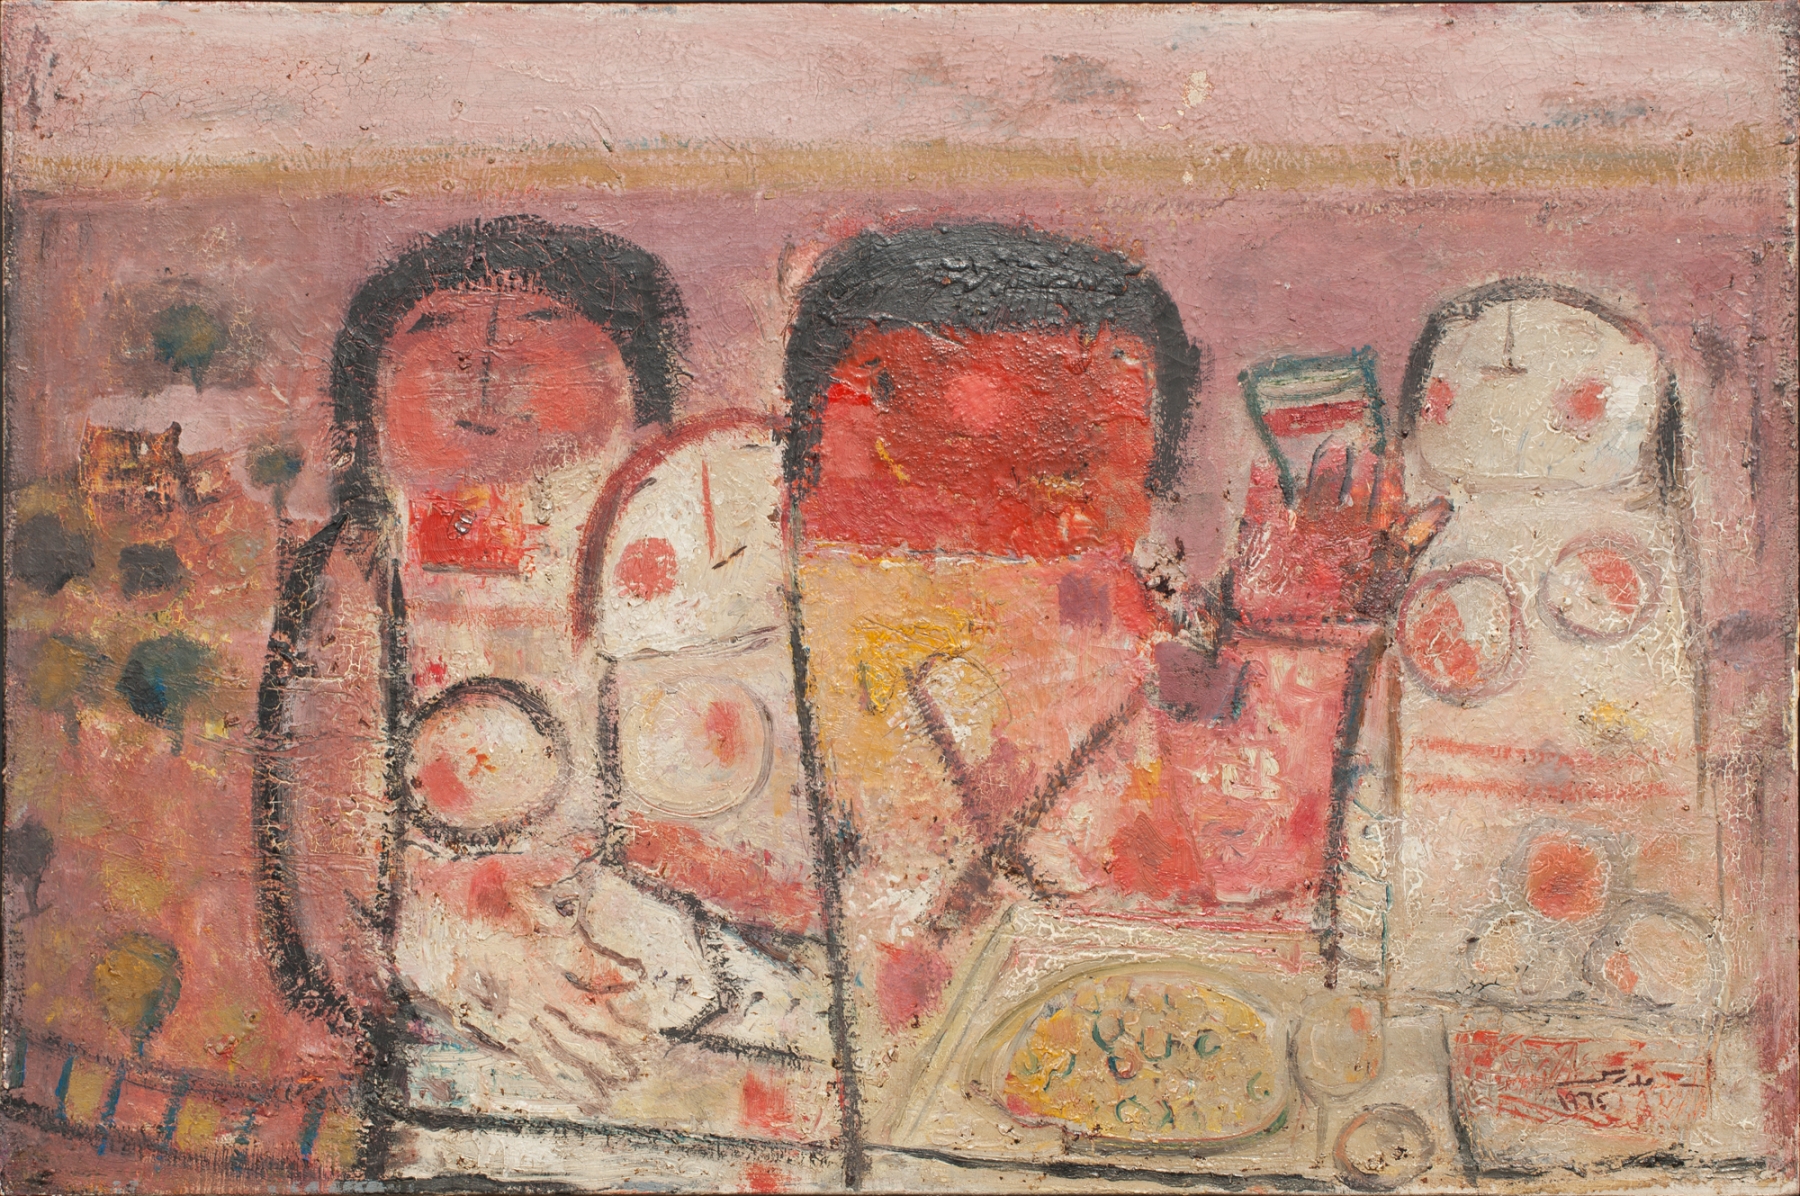 Fateh Moudarres, The Last Supper, Oil on Canvavs, 60 x 90 cm, 1964.